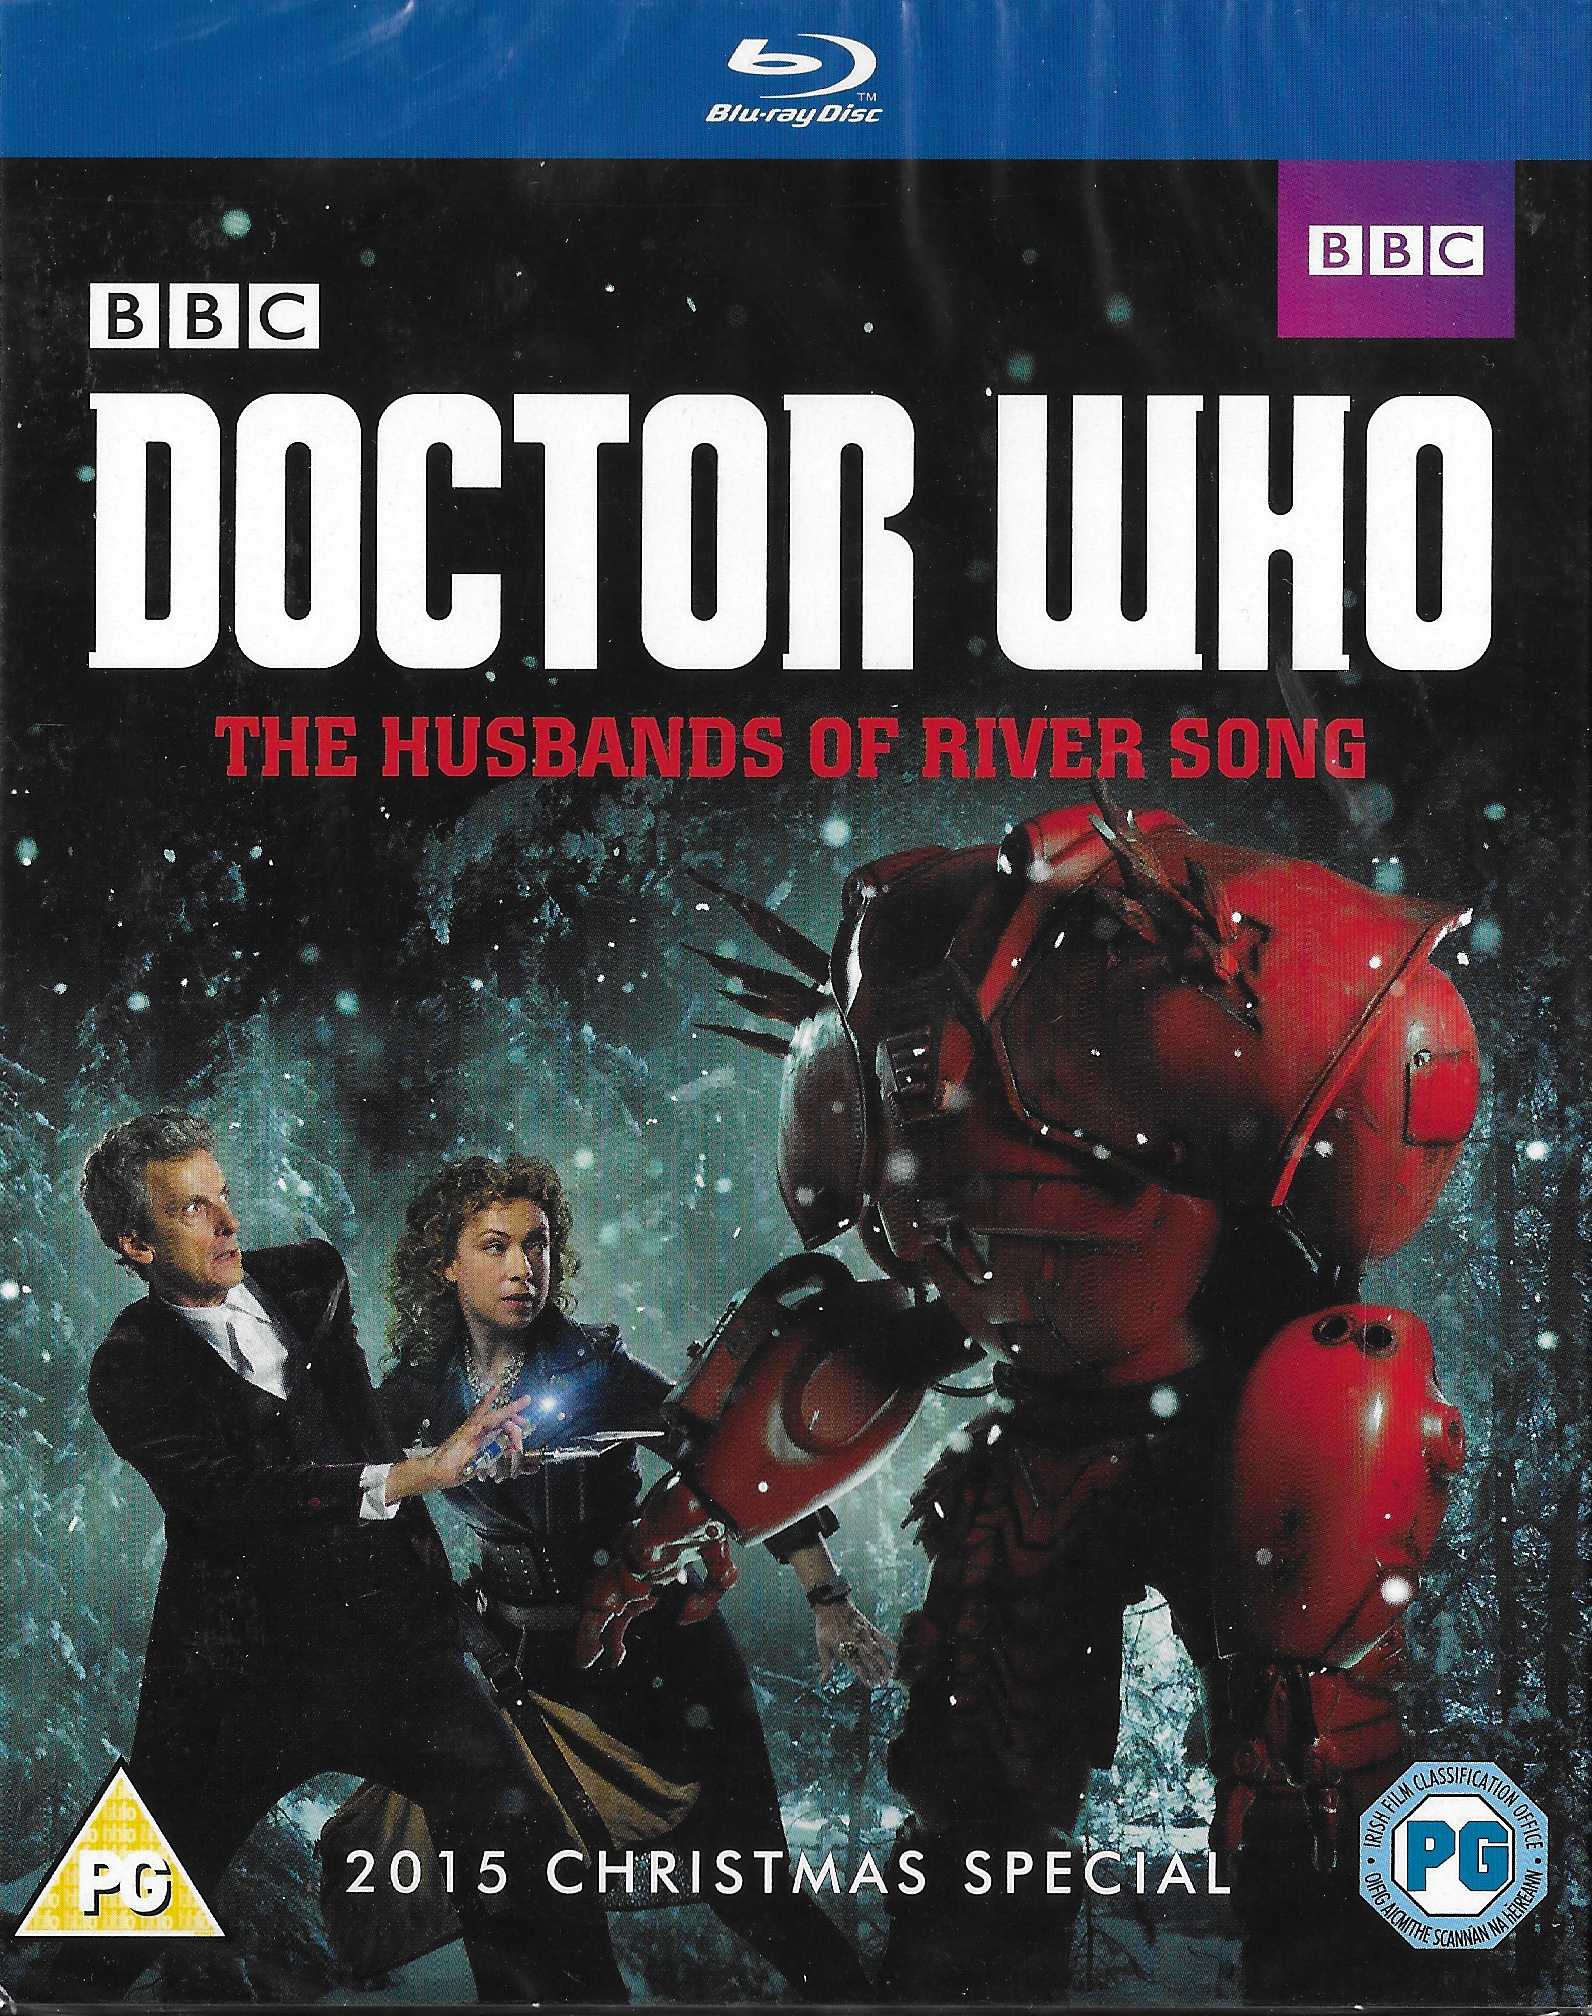 Picture of BBCBD 0332 Doctor Who - The husbands of River Song by artist Steven Moffat from the BBC records and Tapes library